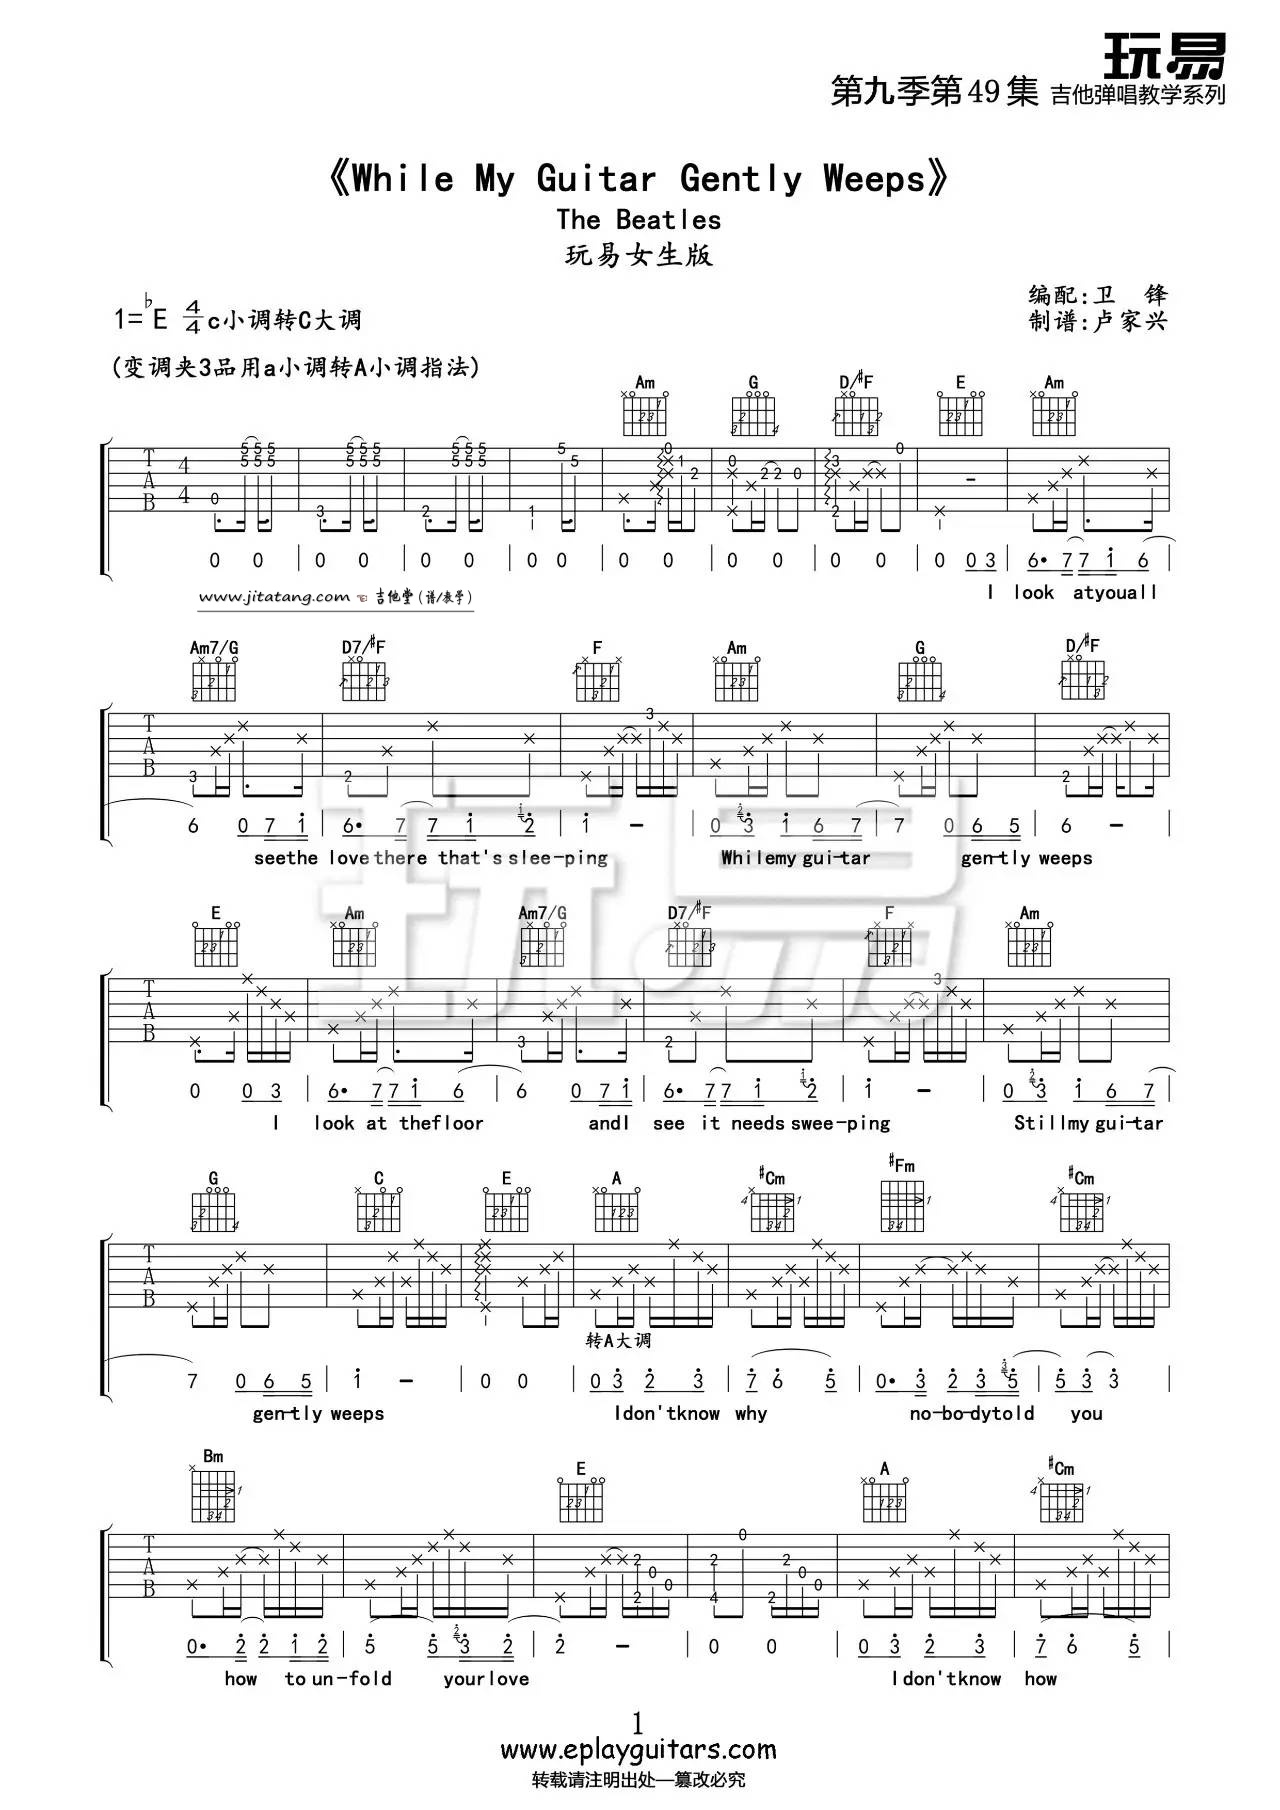 While My Guitar Gently Weeps吉他谱玩易乐器编配吉他堂-1